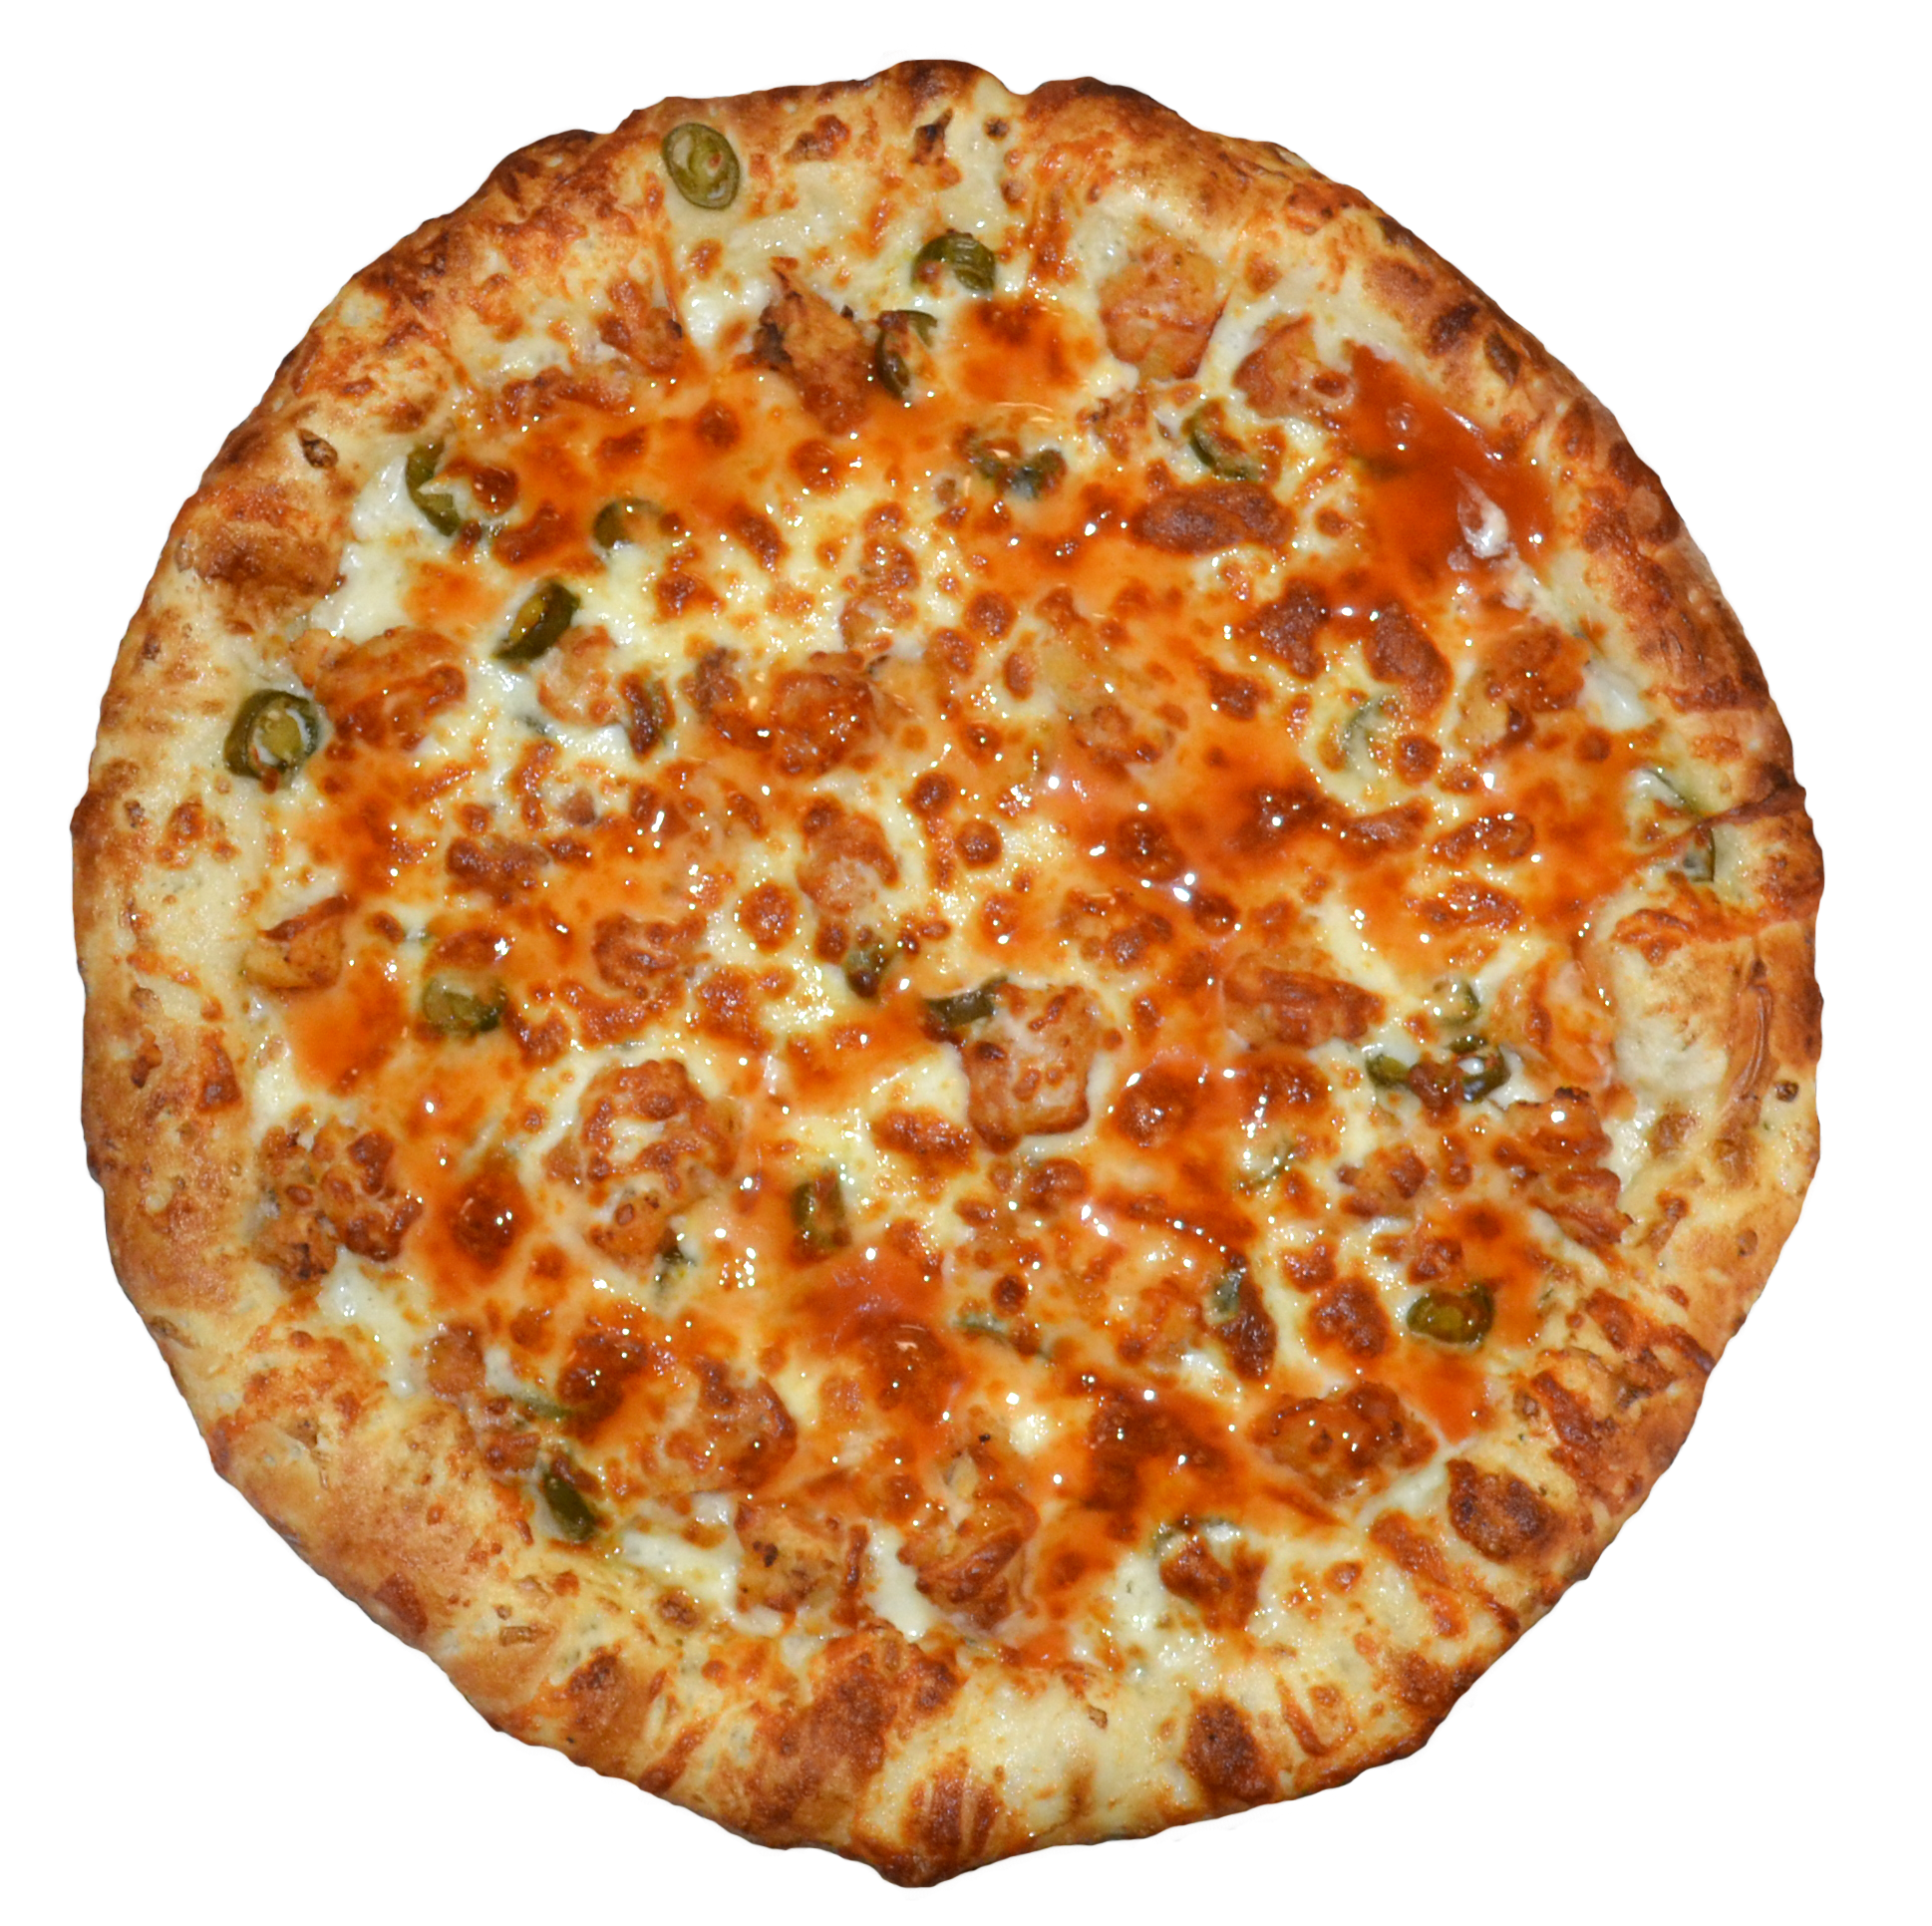 cheddar cheese pizza png image #7940